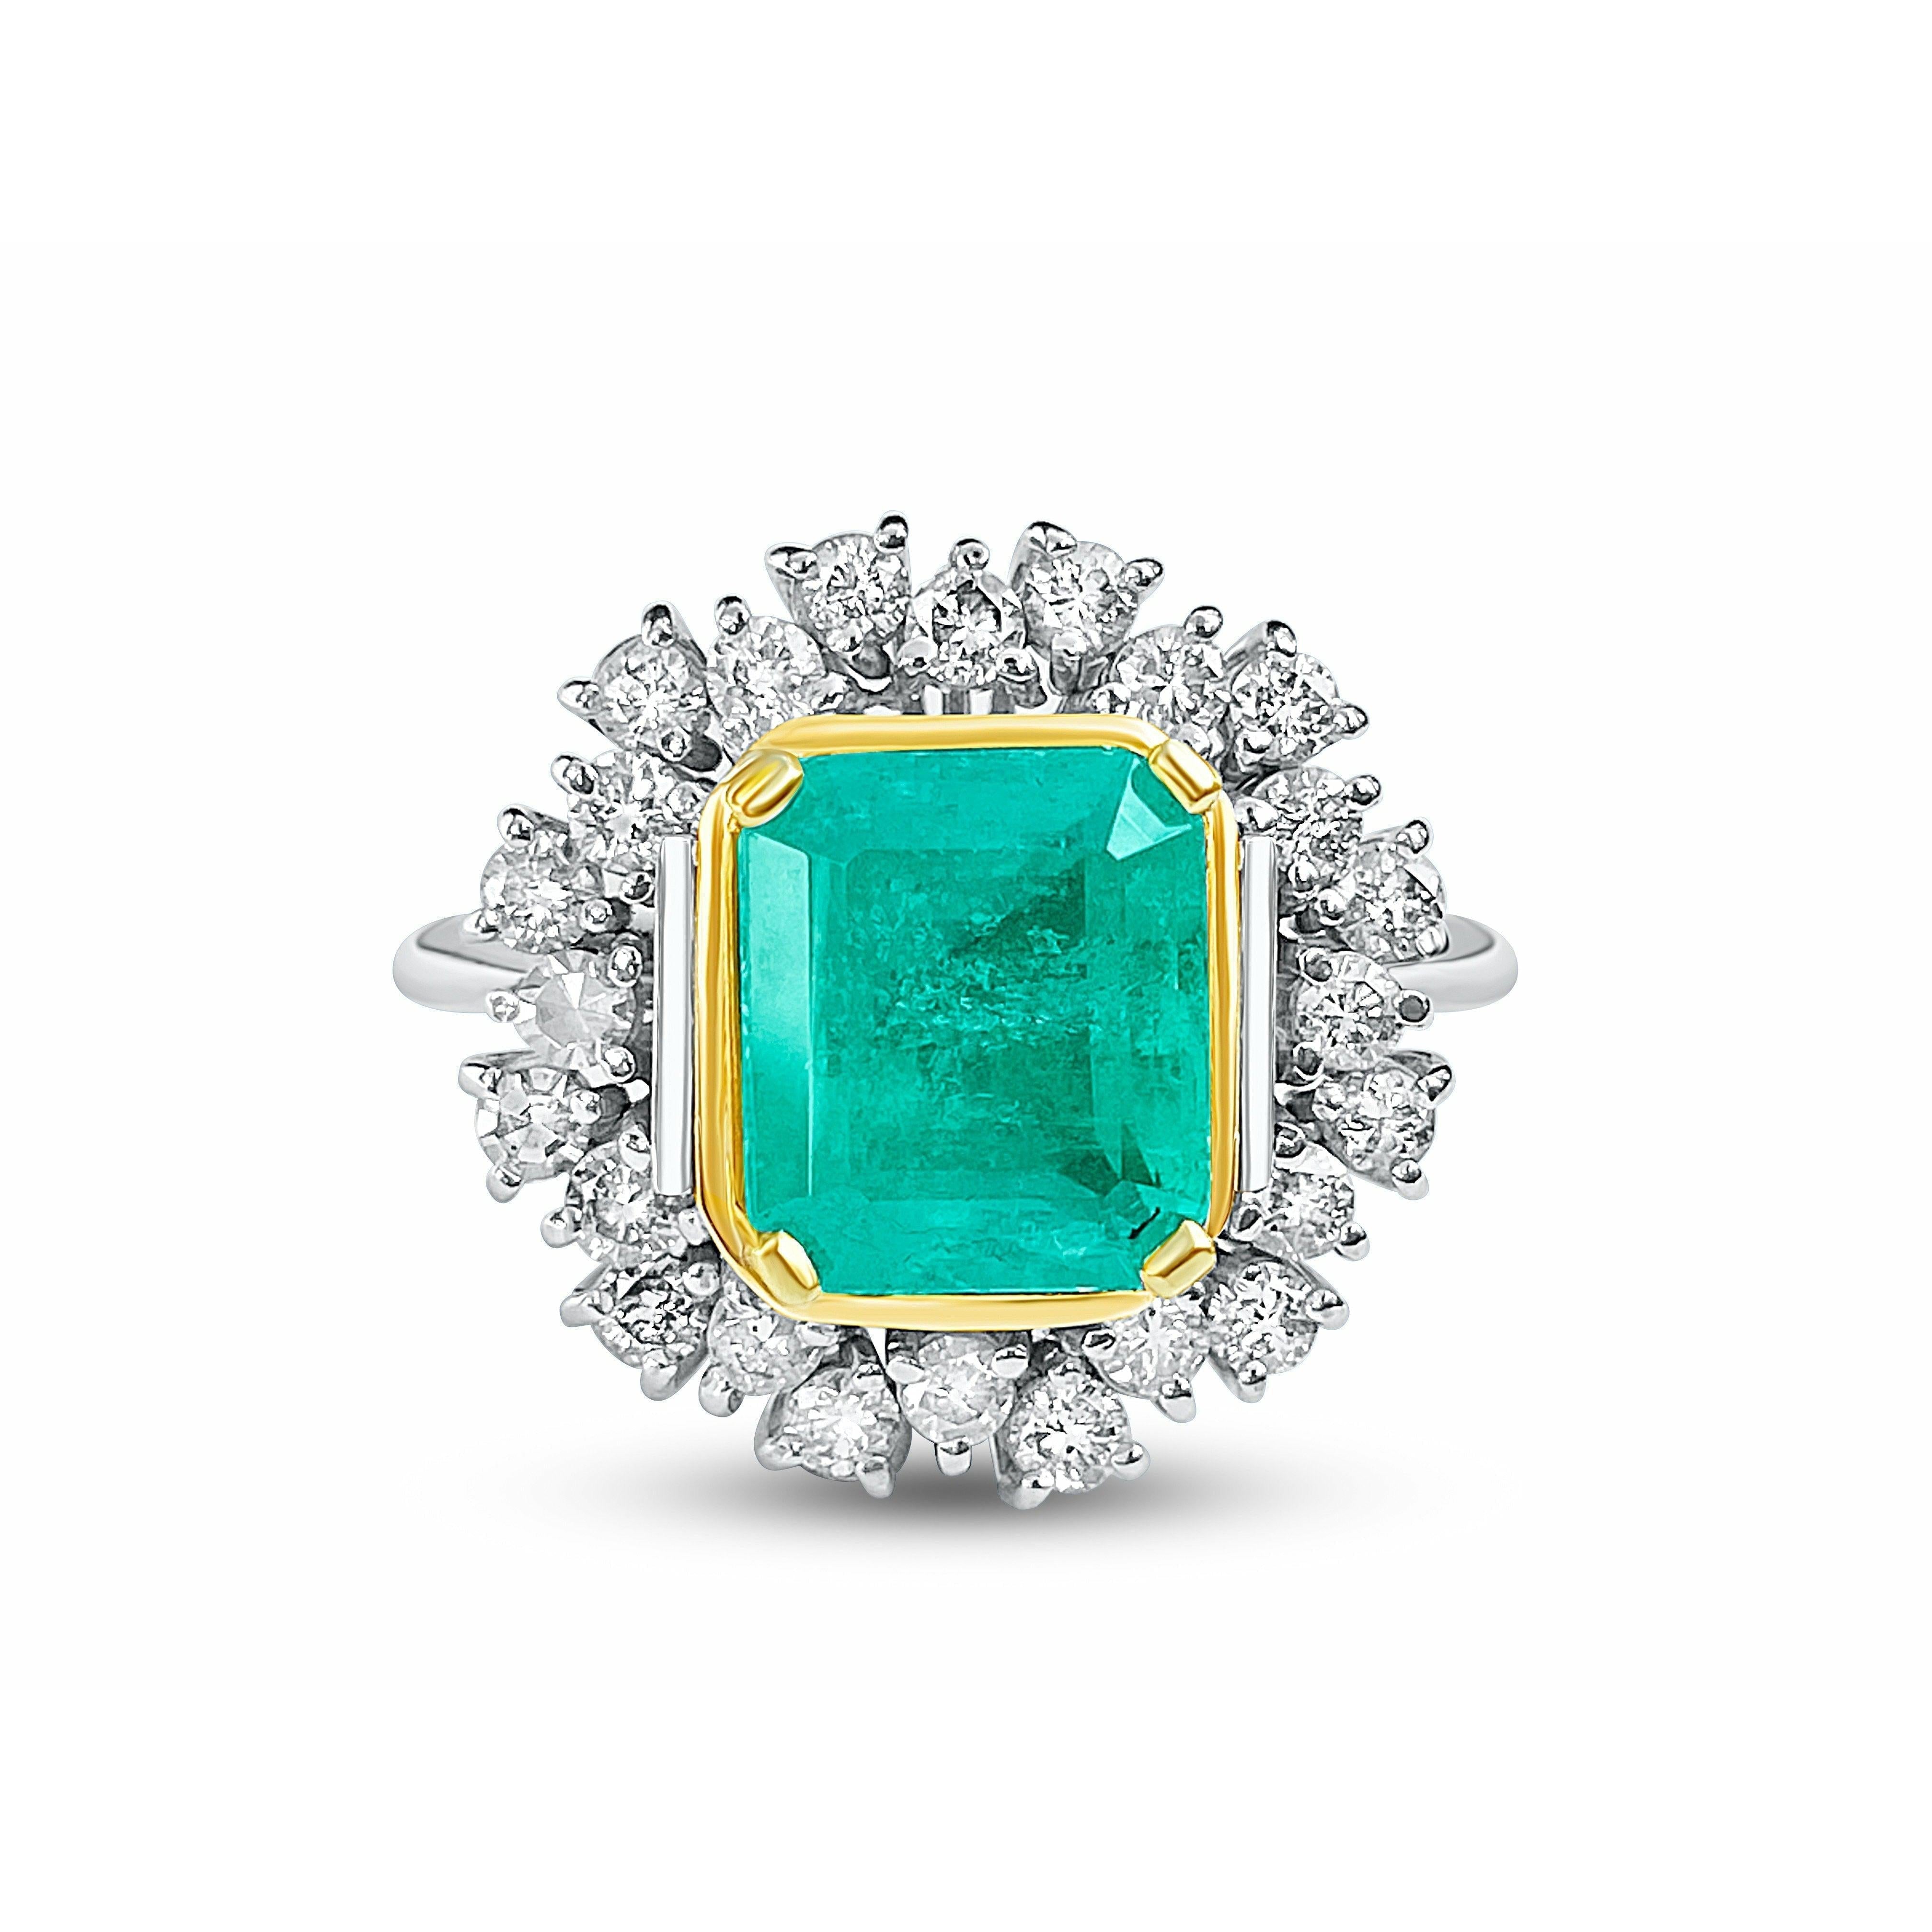 2.95 Carat Natural Emerald and Diamond Ring in 18k gold - ASSAY